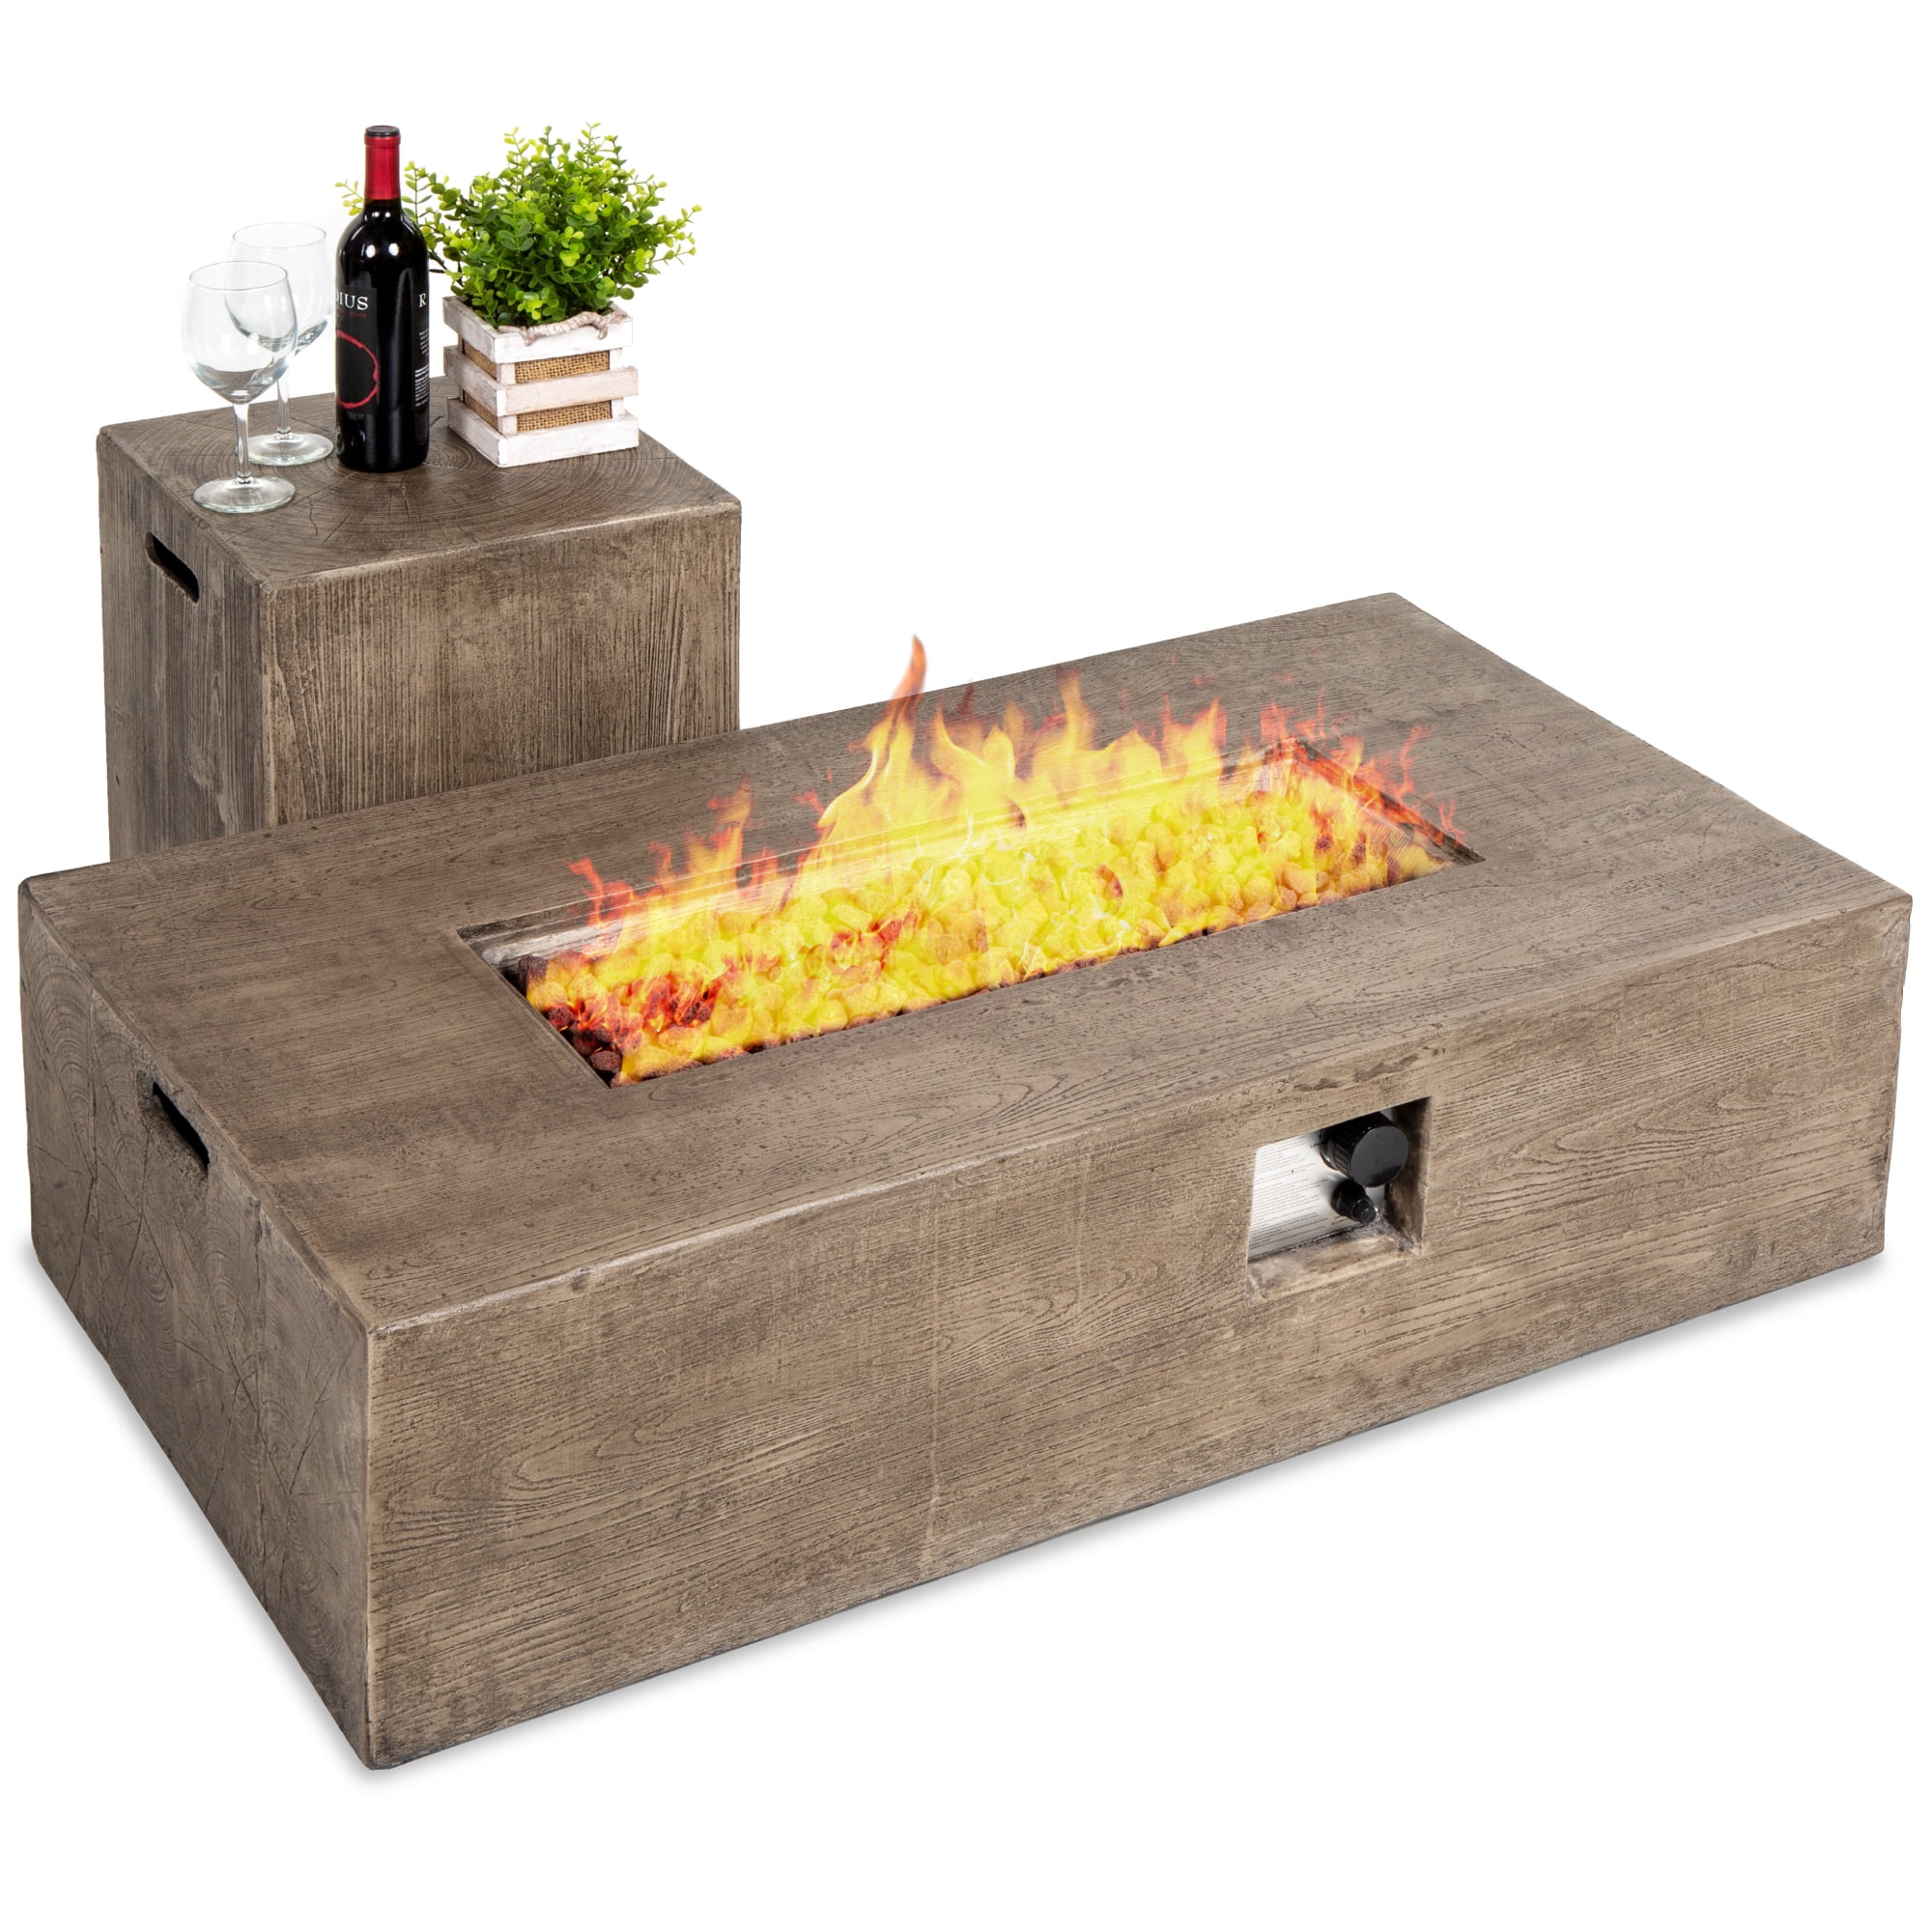 Best Choice Products 48x27in 50 000 Btu Patio Propane Fire Pit Table Side Table Tank Storage W Wood Finish Pit Cover Walmart Com